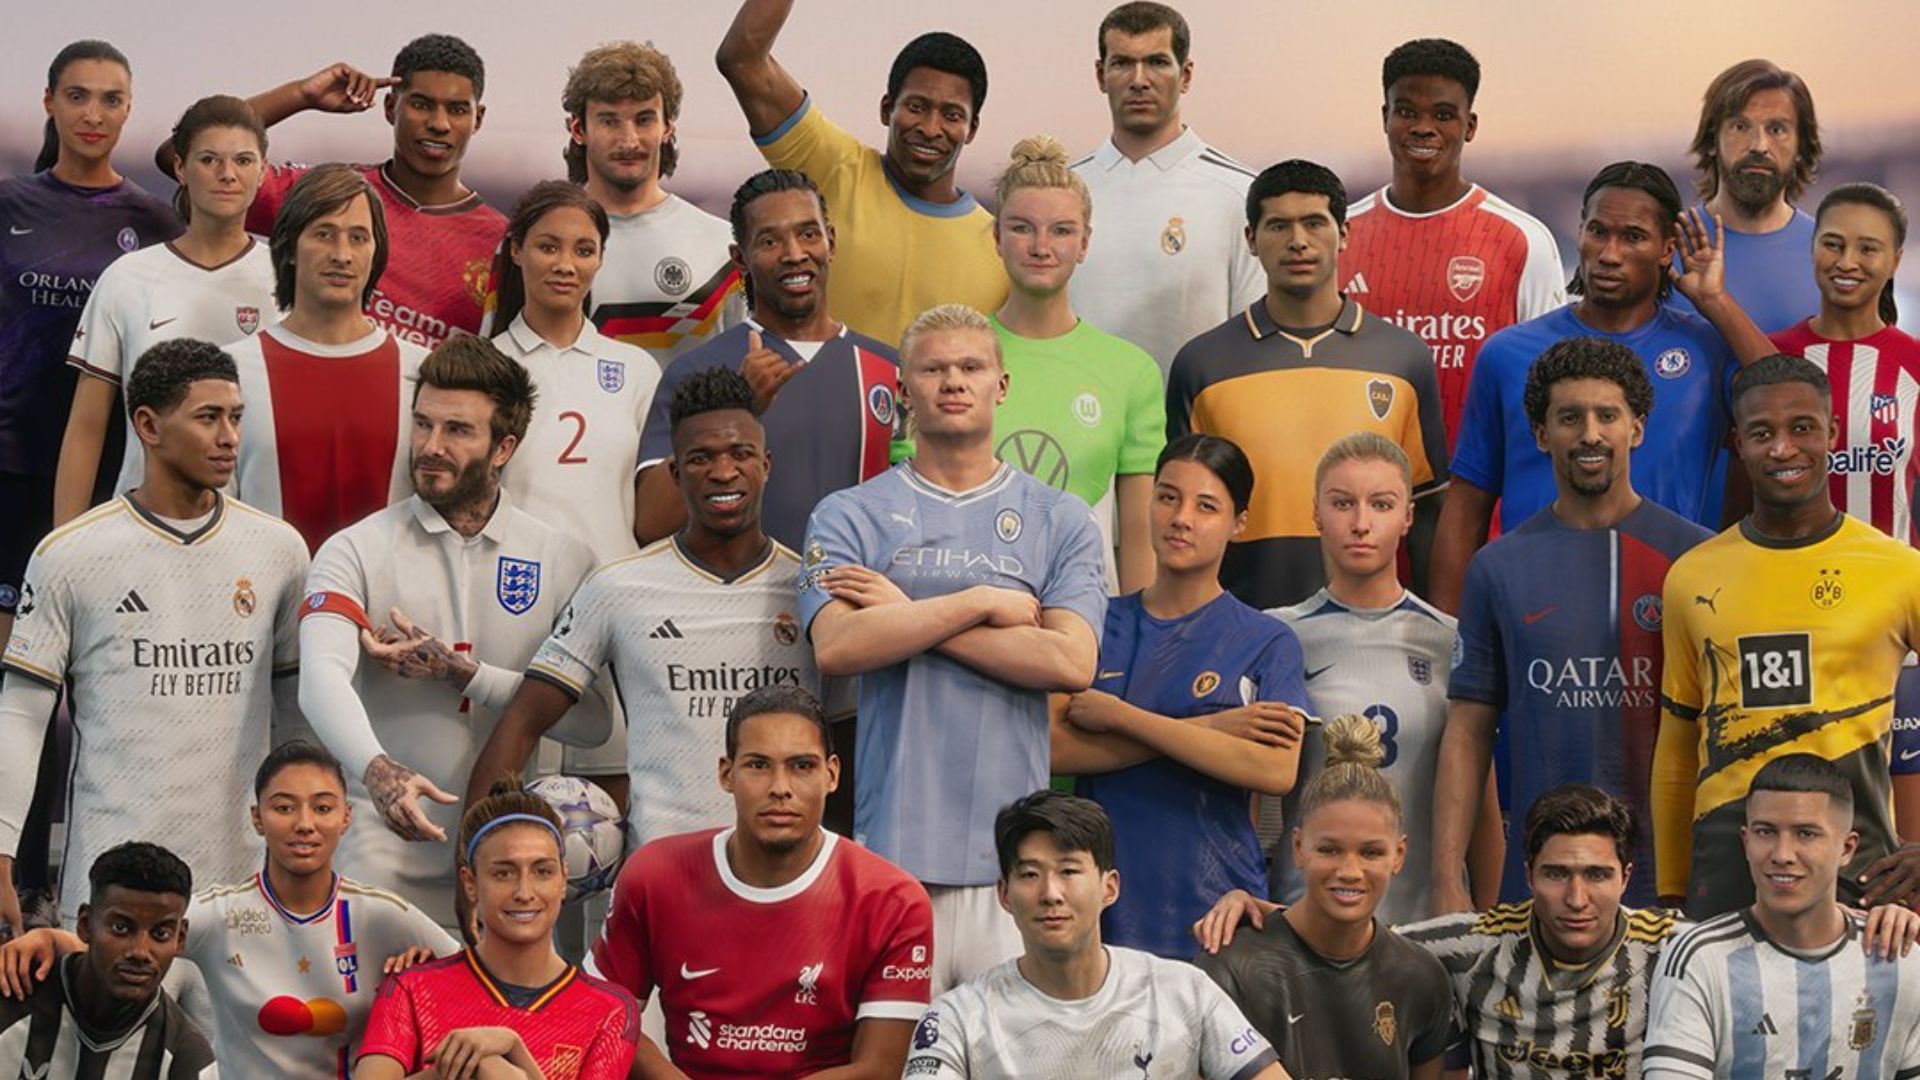 FIFA 23 First Look Trailer Scheduled For July 20, Ultimate Edition